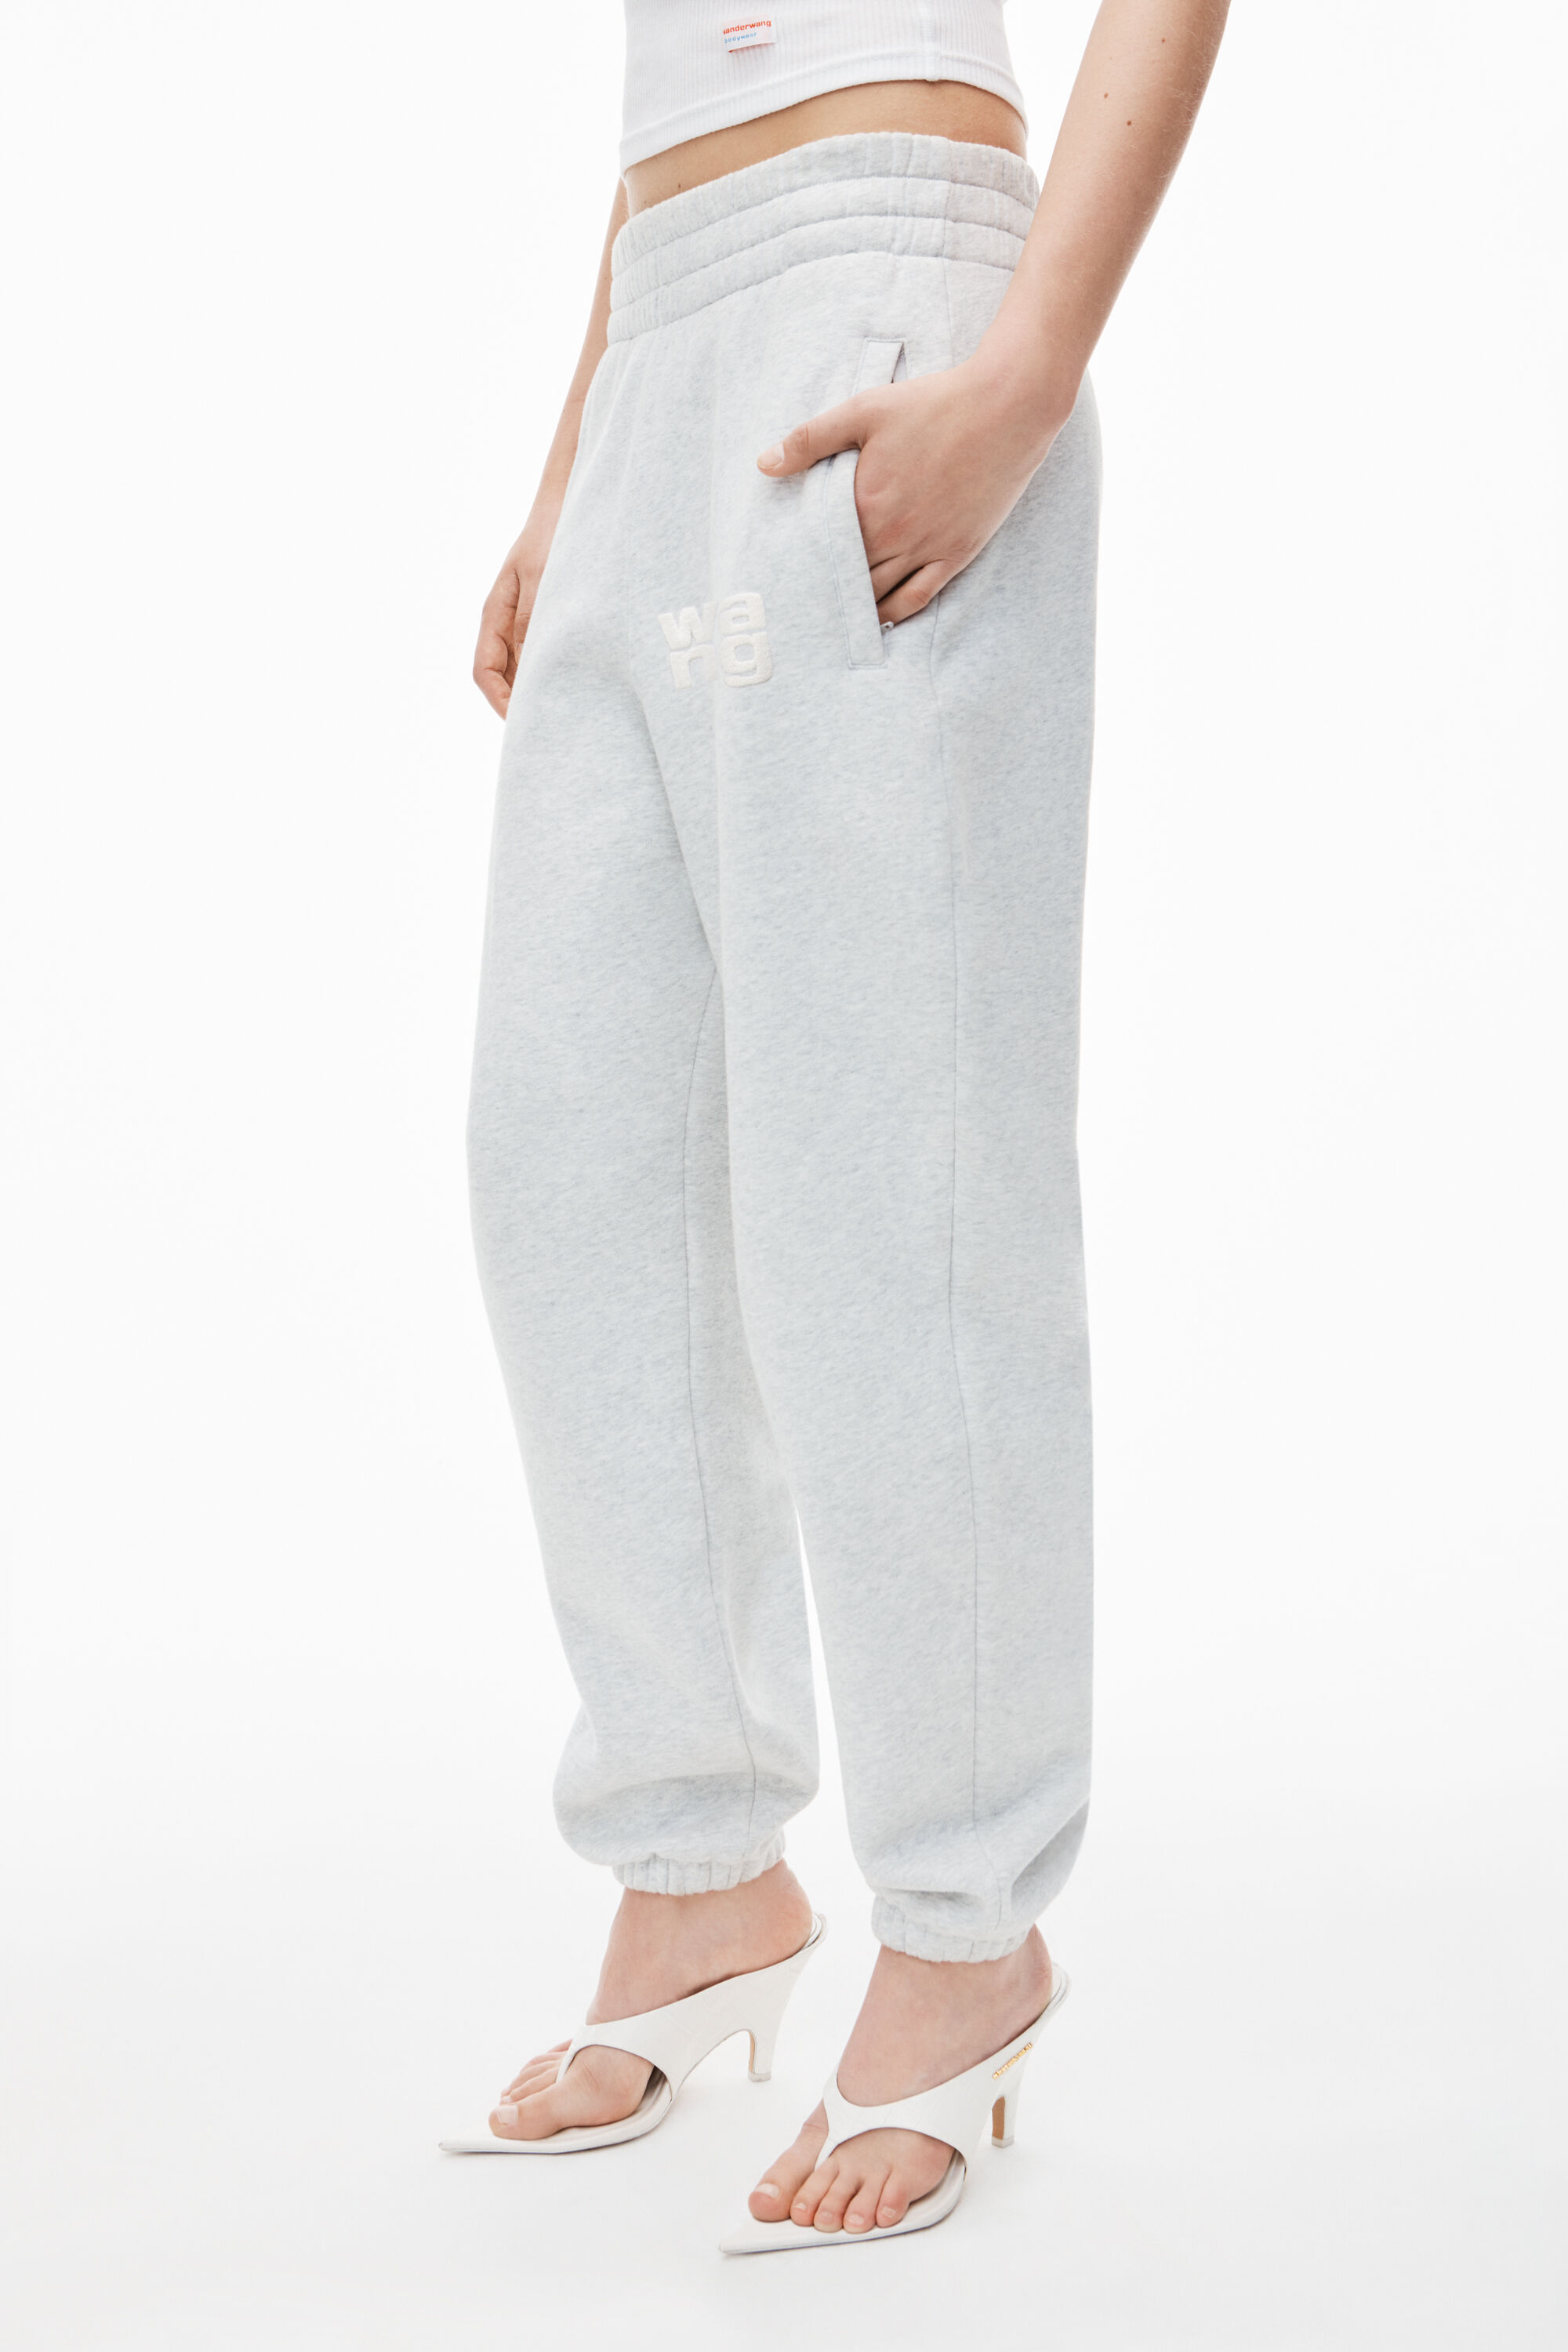 PUFF LOGO SWEATPANT IN STRUCTURED TERRY in LIGHT HEATHER GREY 